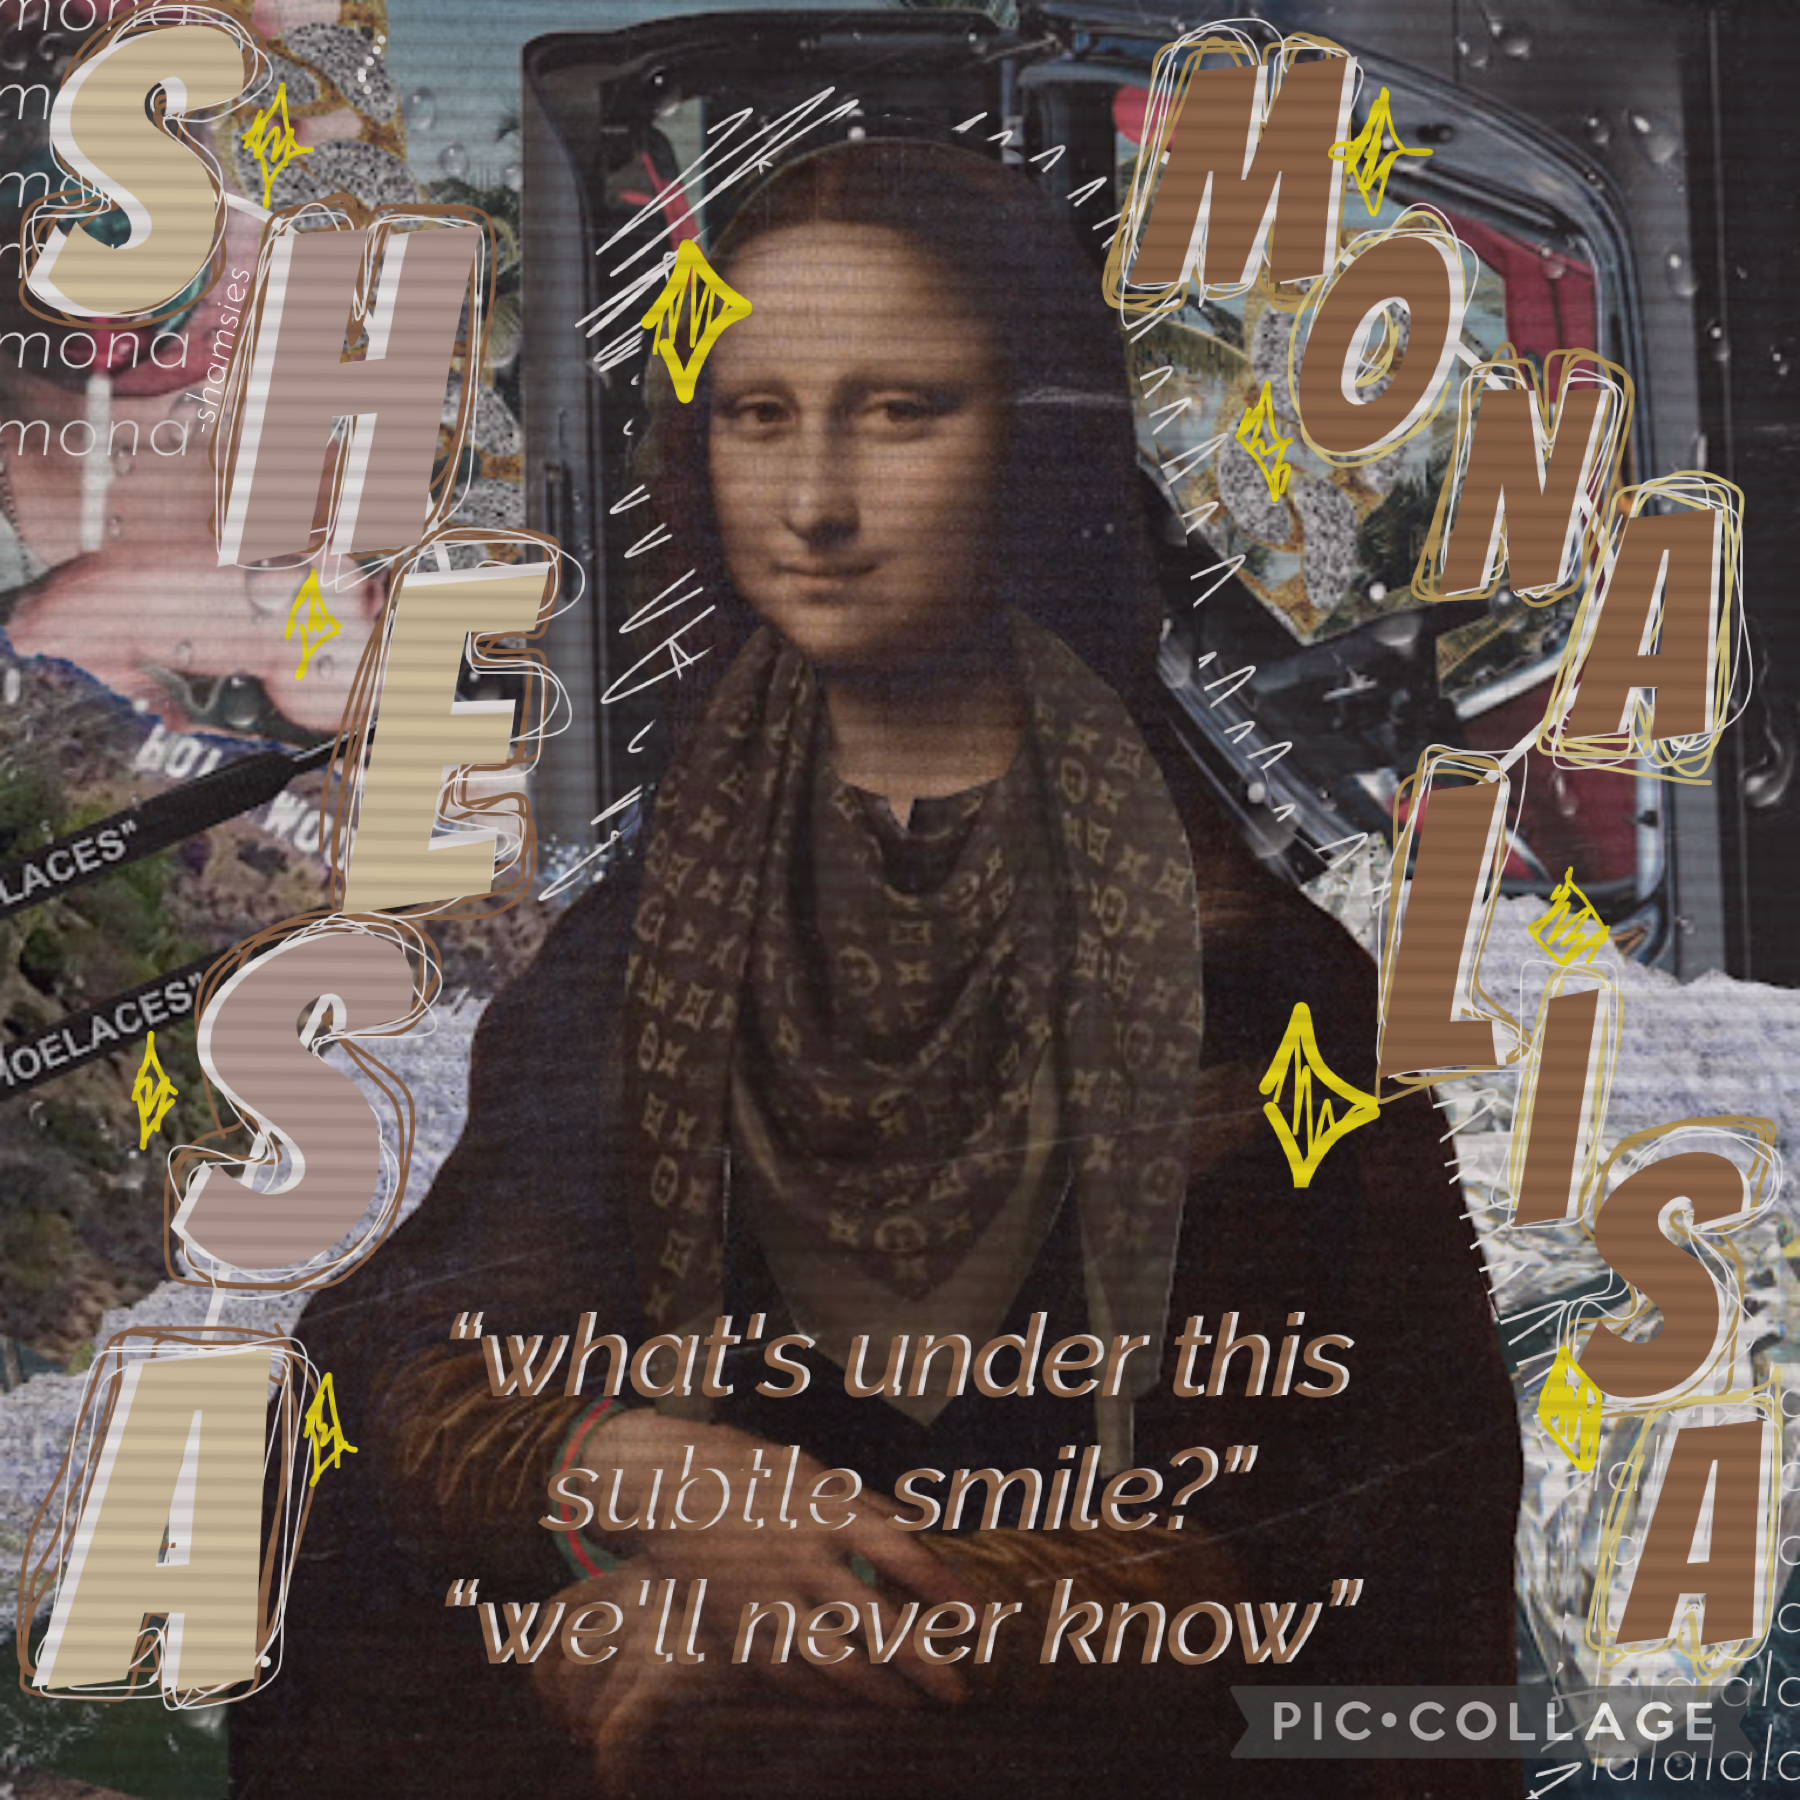 i belive in: josefin supremecy🧎🏻‍♀️
monalisa - VALNTN, tray haggerty, & peter fenn
ayyyy another post :DD
i don’t know if i like or hate this one 🤔 oh well :))
